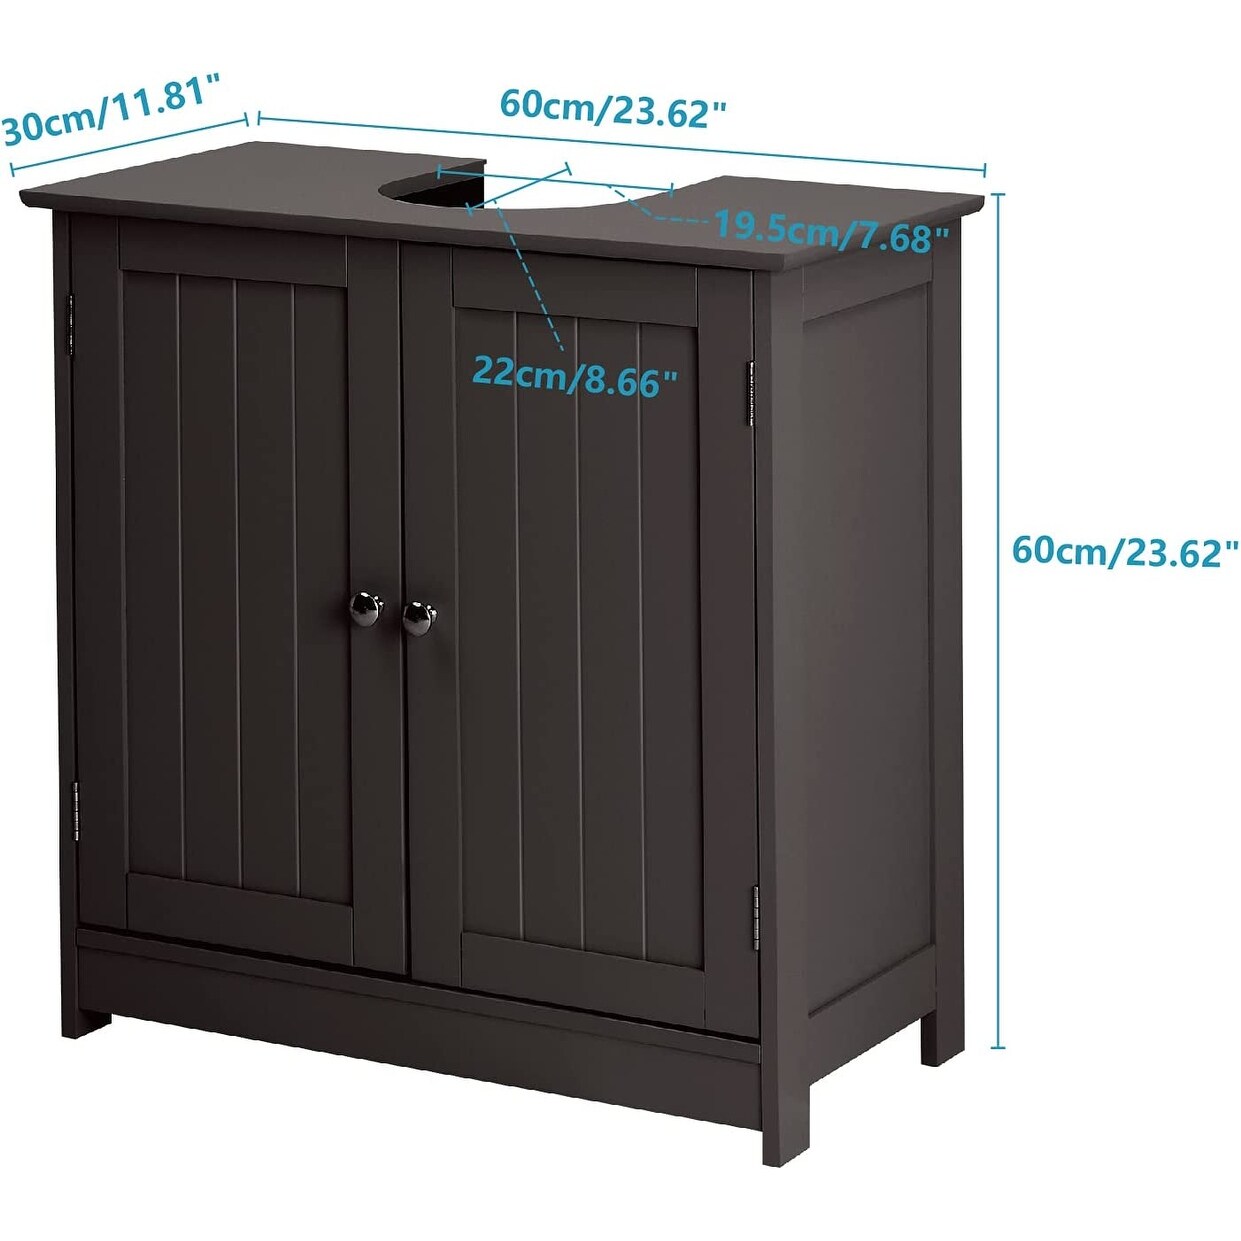 https://ak1.ostkcdn.com/images/products/is/images/direct/2d9565bbd9030beb36ef0940ce2cb4e4ea5c5551/Pedestal-Under-Sink-Storage-Bathroom-Vanity-with-2-Doors-Traditional-Bathroom-Cabinet-Space-Saver-Organizer-23-5-8.jpg